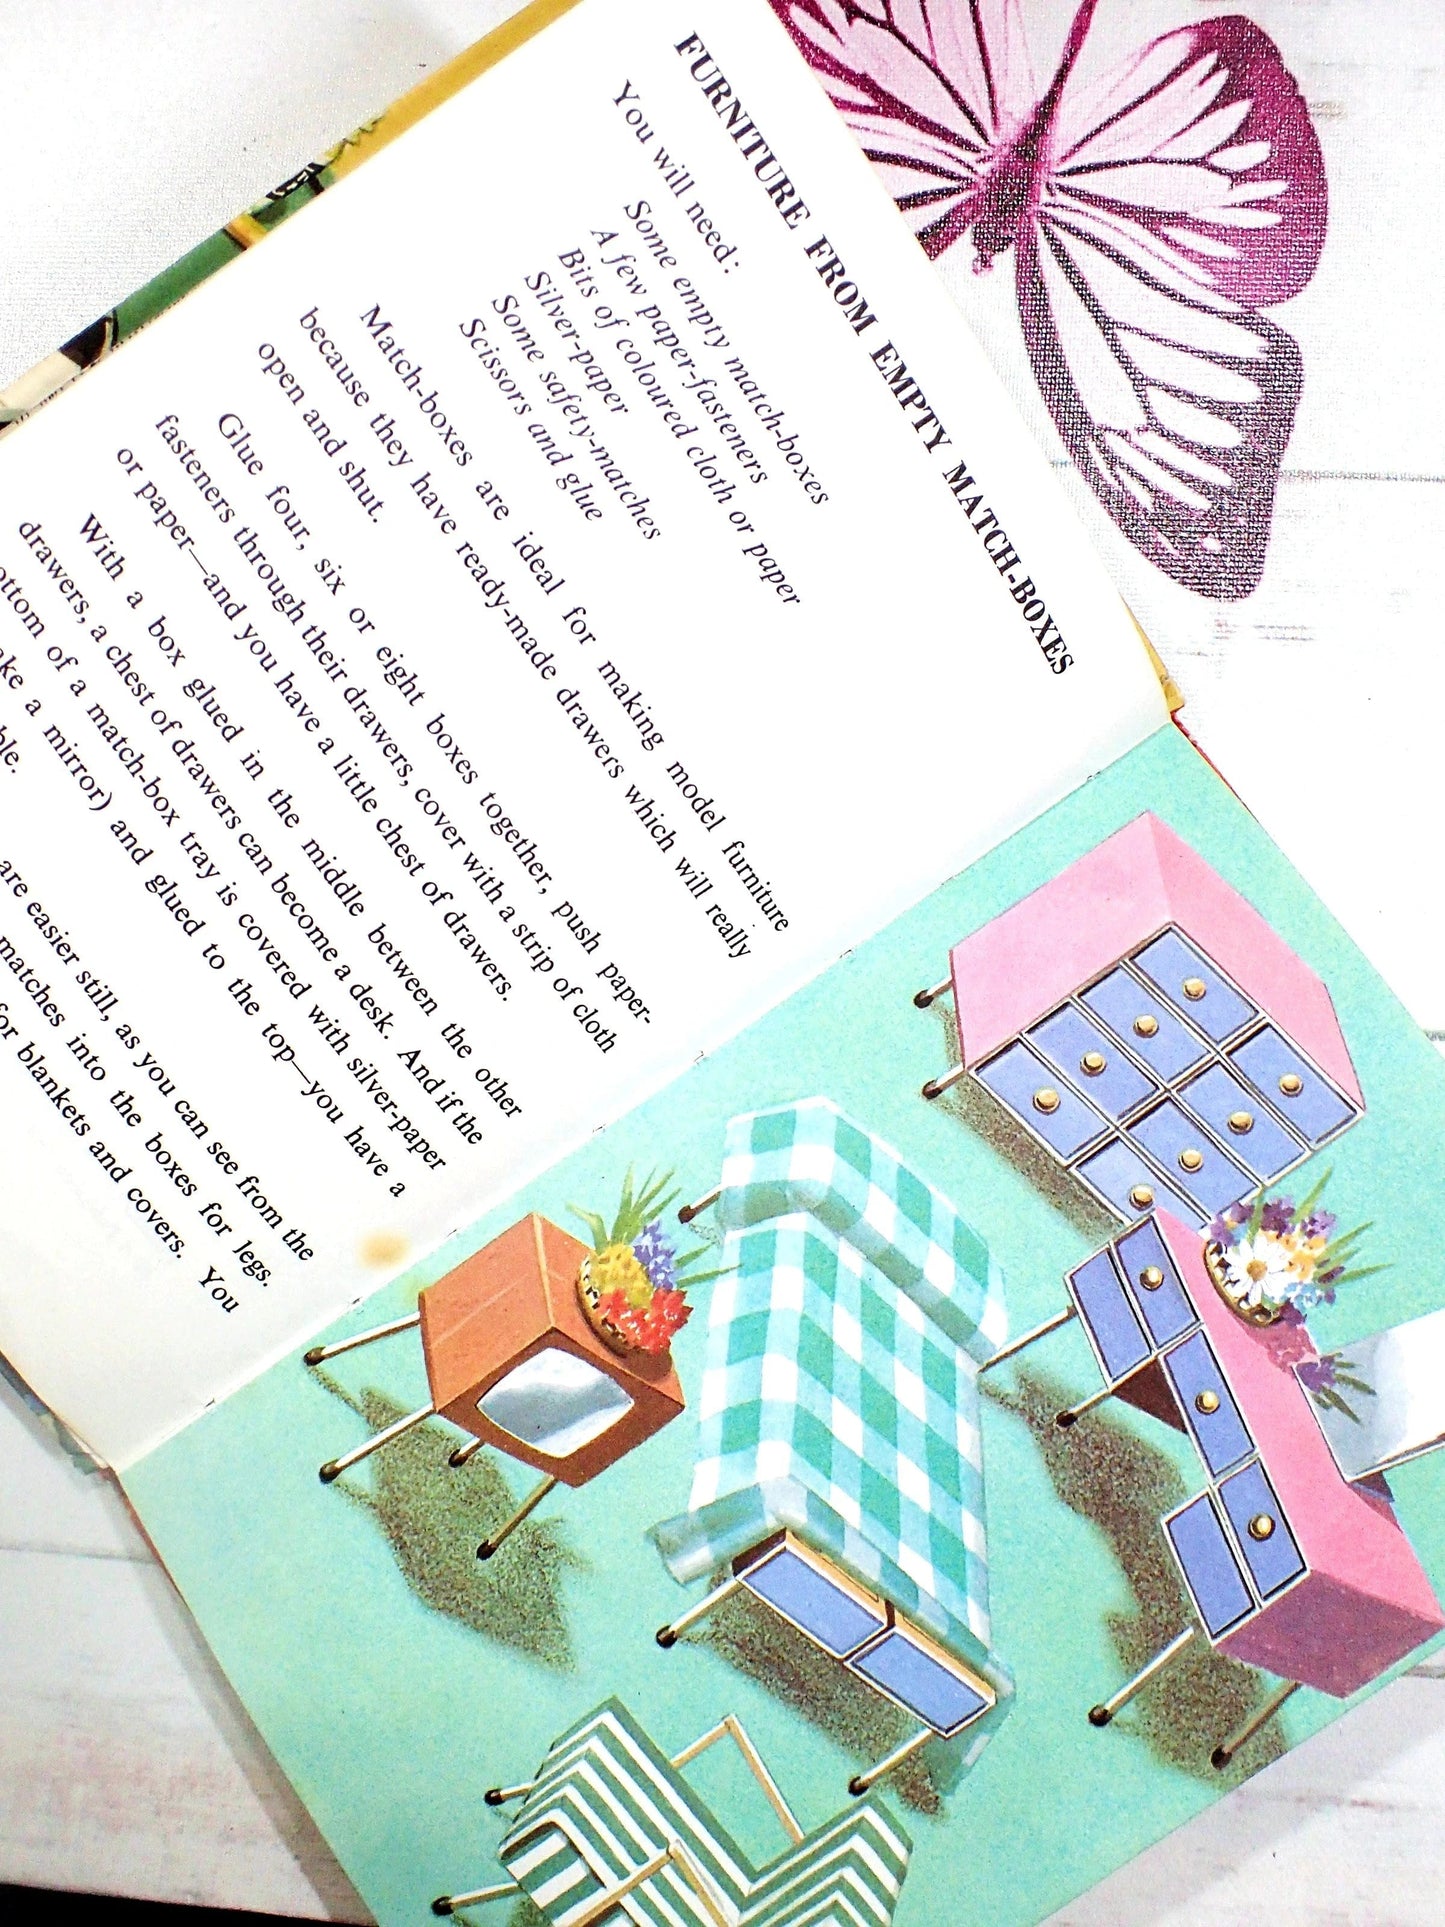 Furniture from empty matchboxes ladybird book